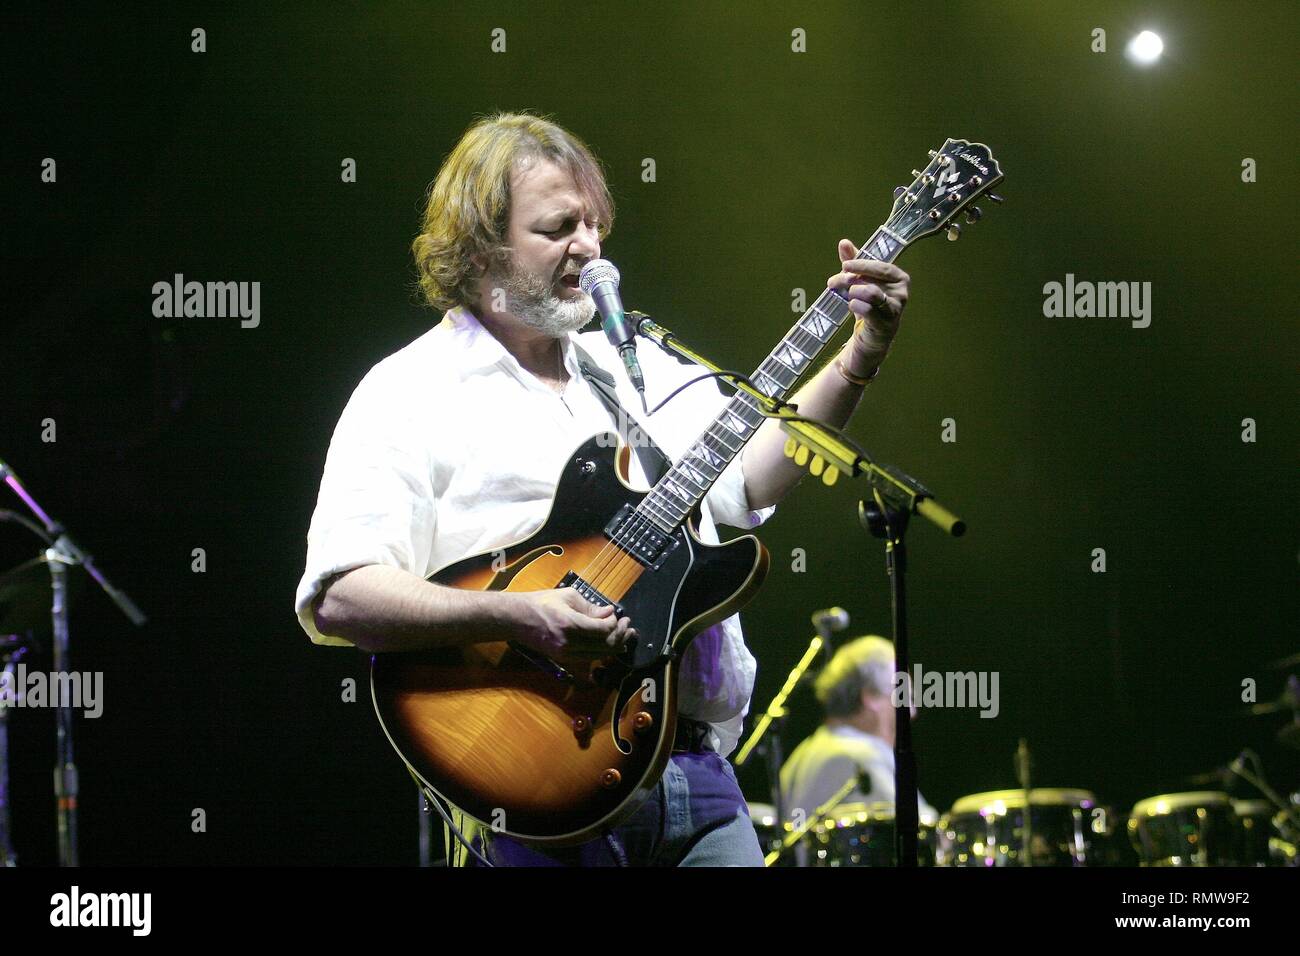 Lead singer and rhythm guitarist, John Bell, of the southern rock band Widespread Panic, is shown performing on stage during a 'live' concert appearance. Stock Photo